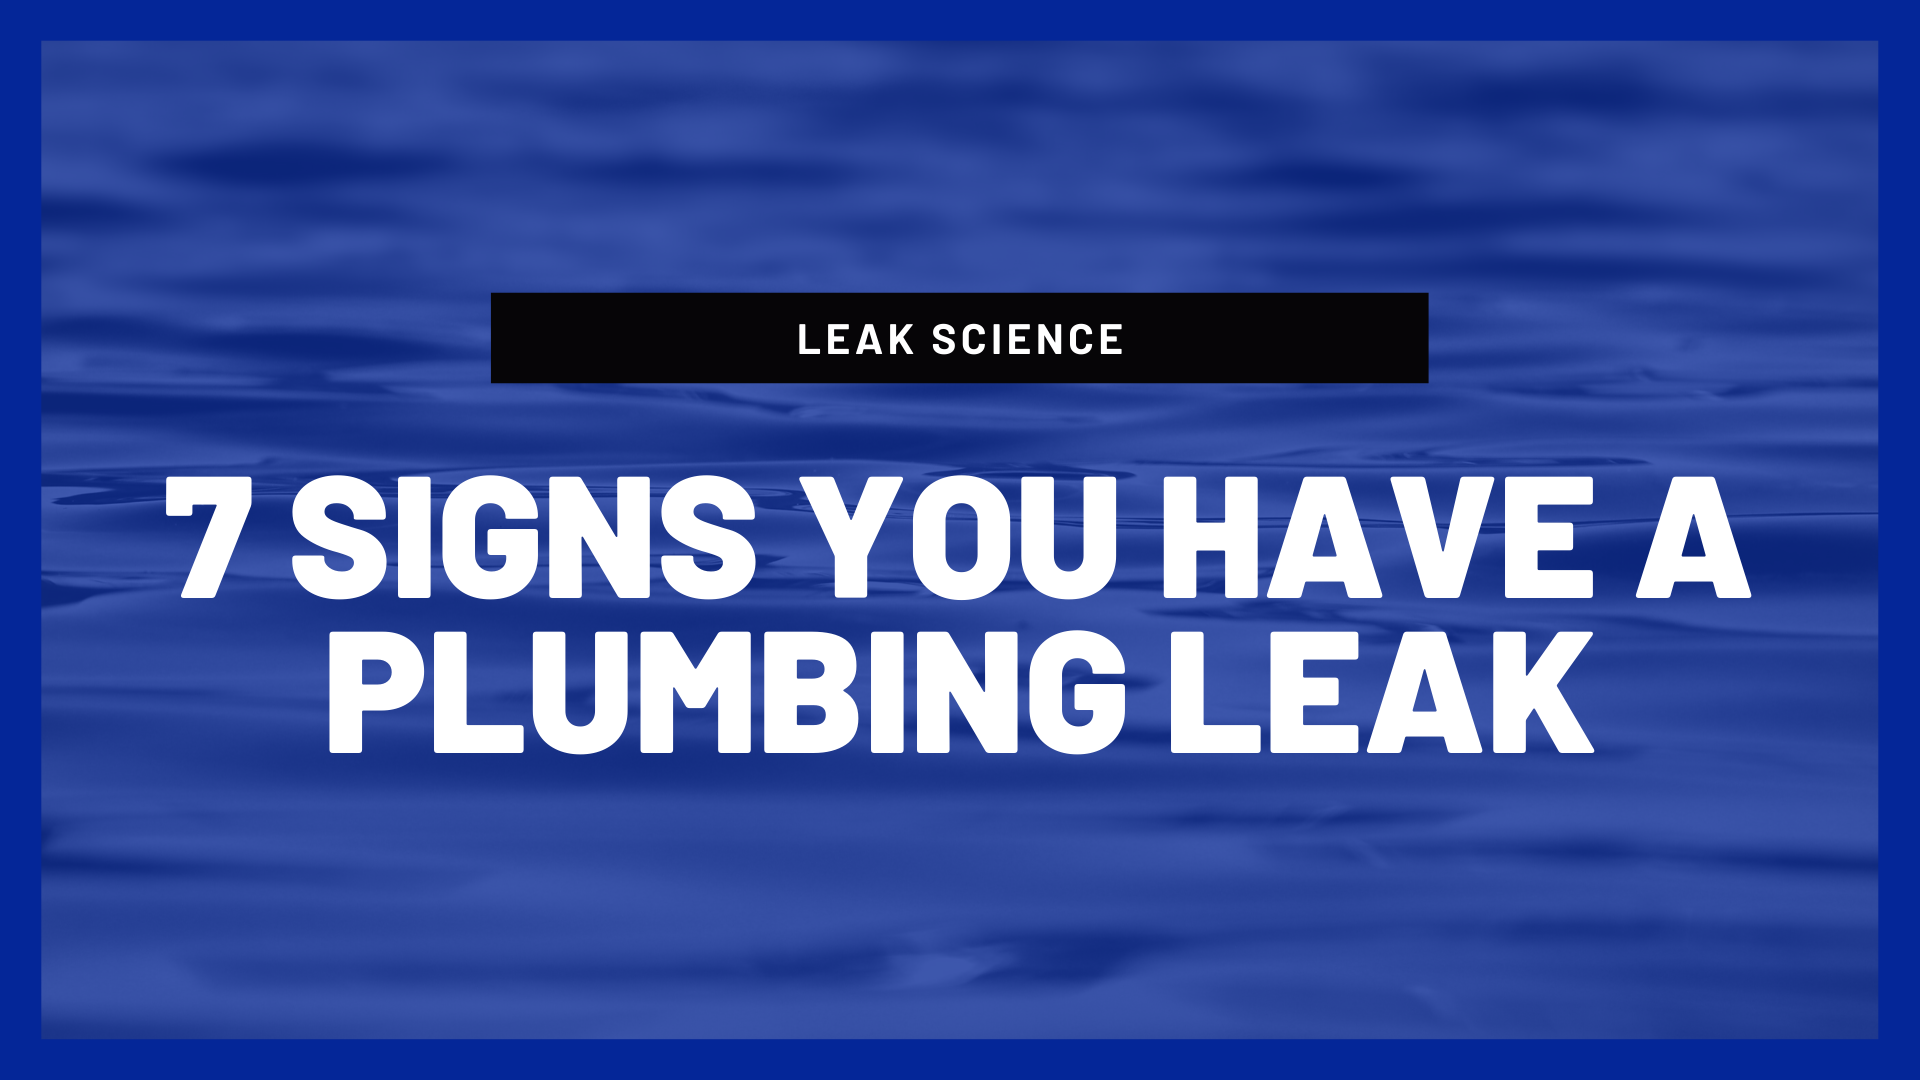 7 signs you have a plumbing leak